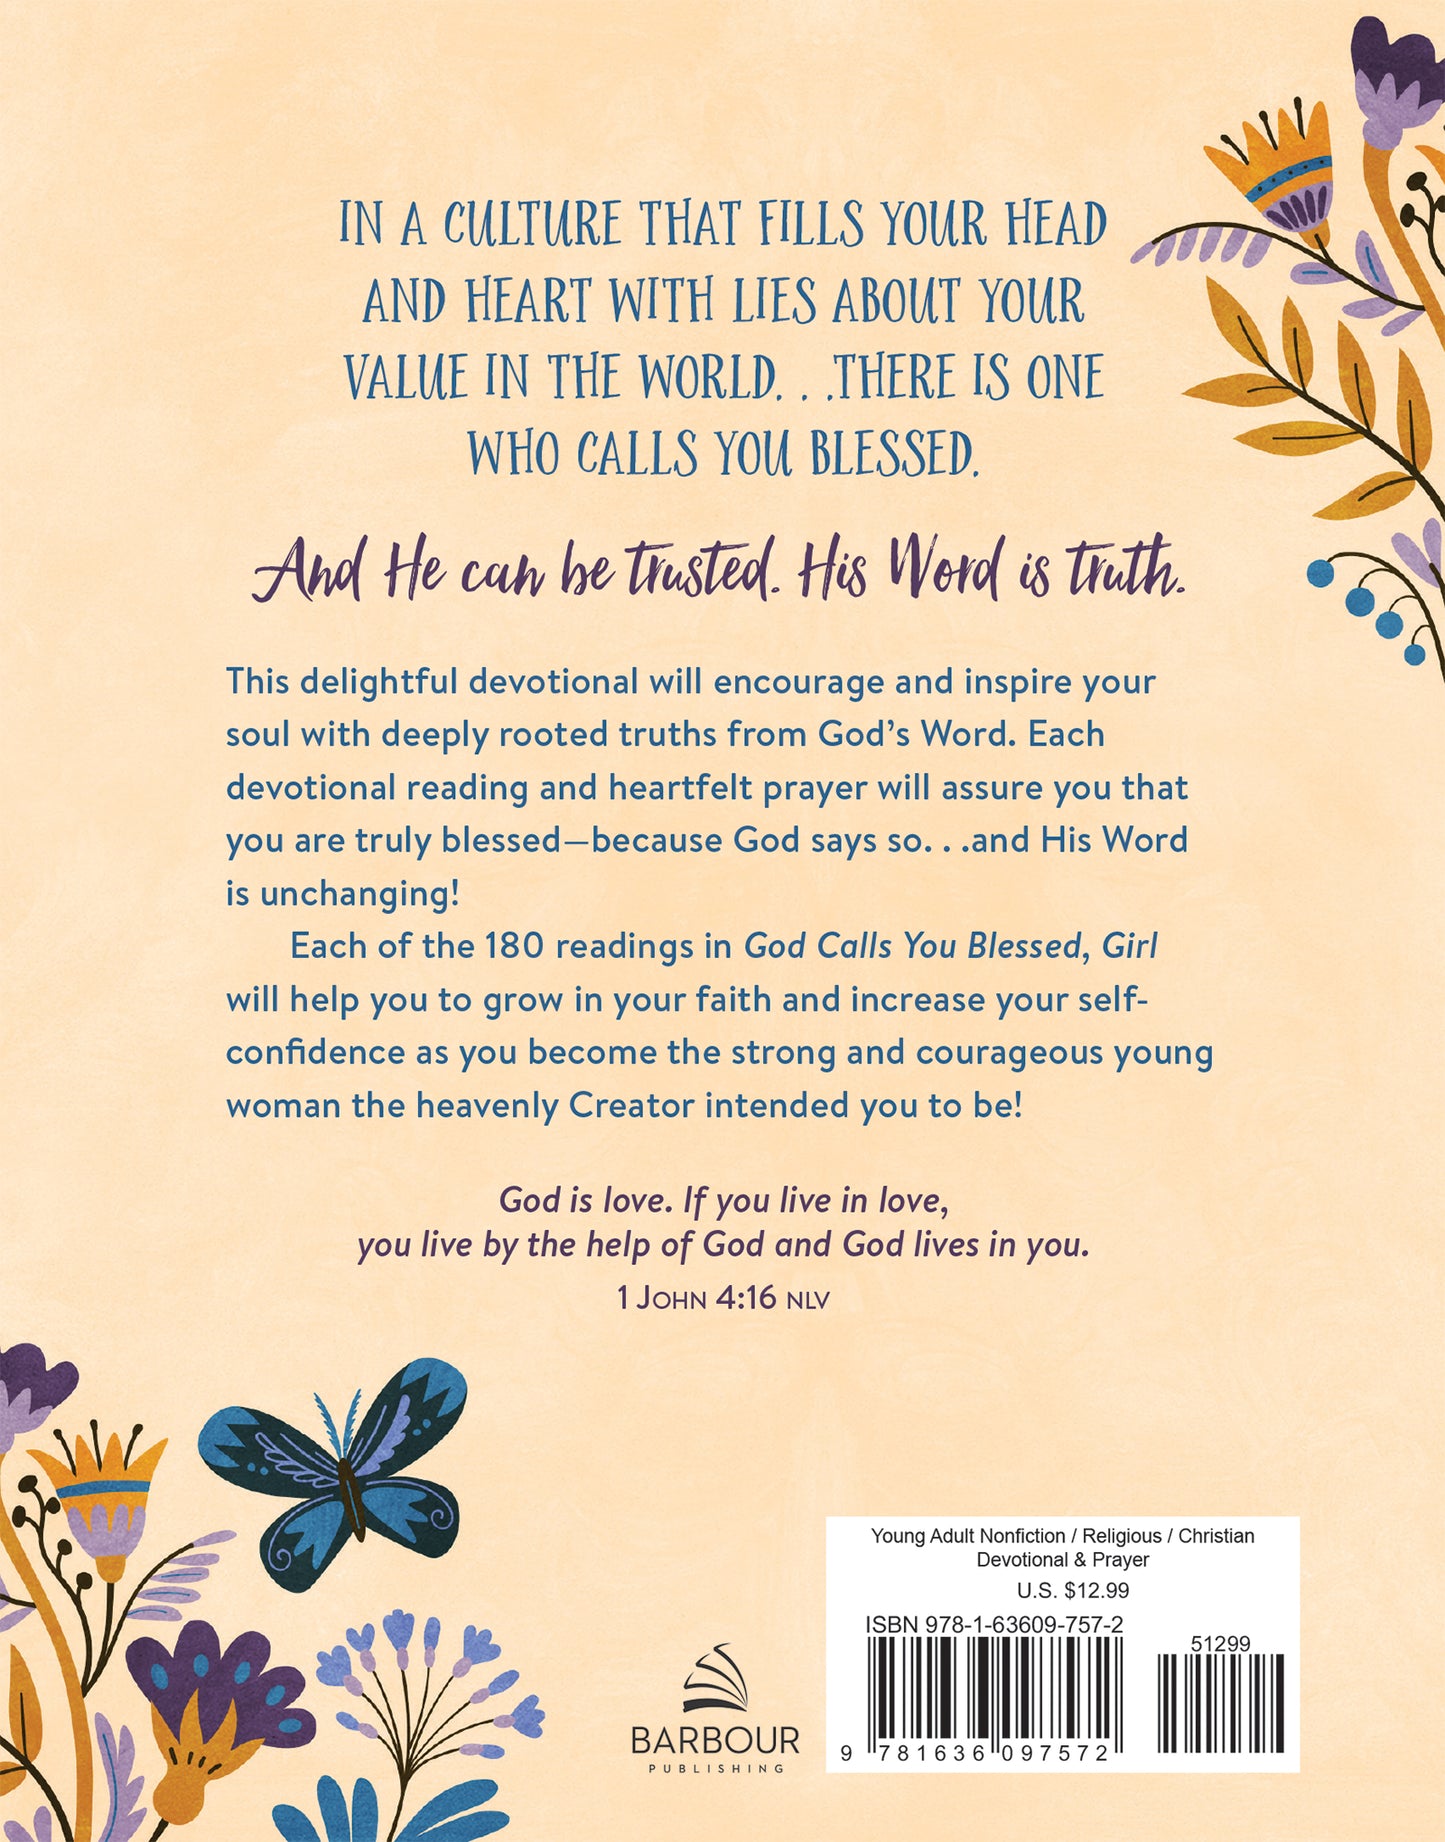 God Calls You Blessed, Girl - The Christian Gift Company